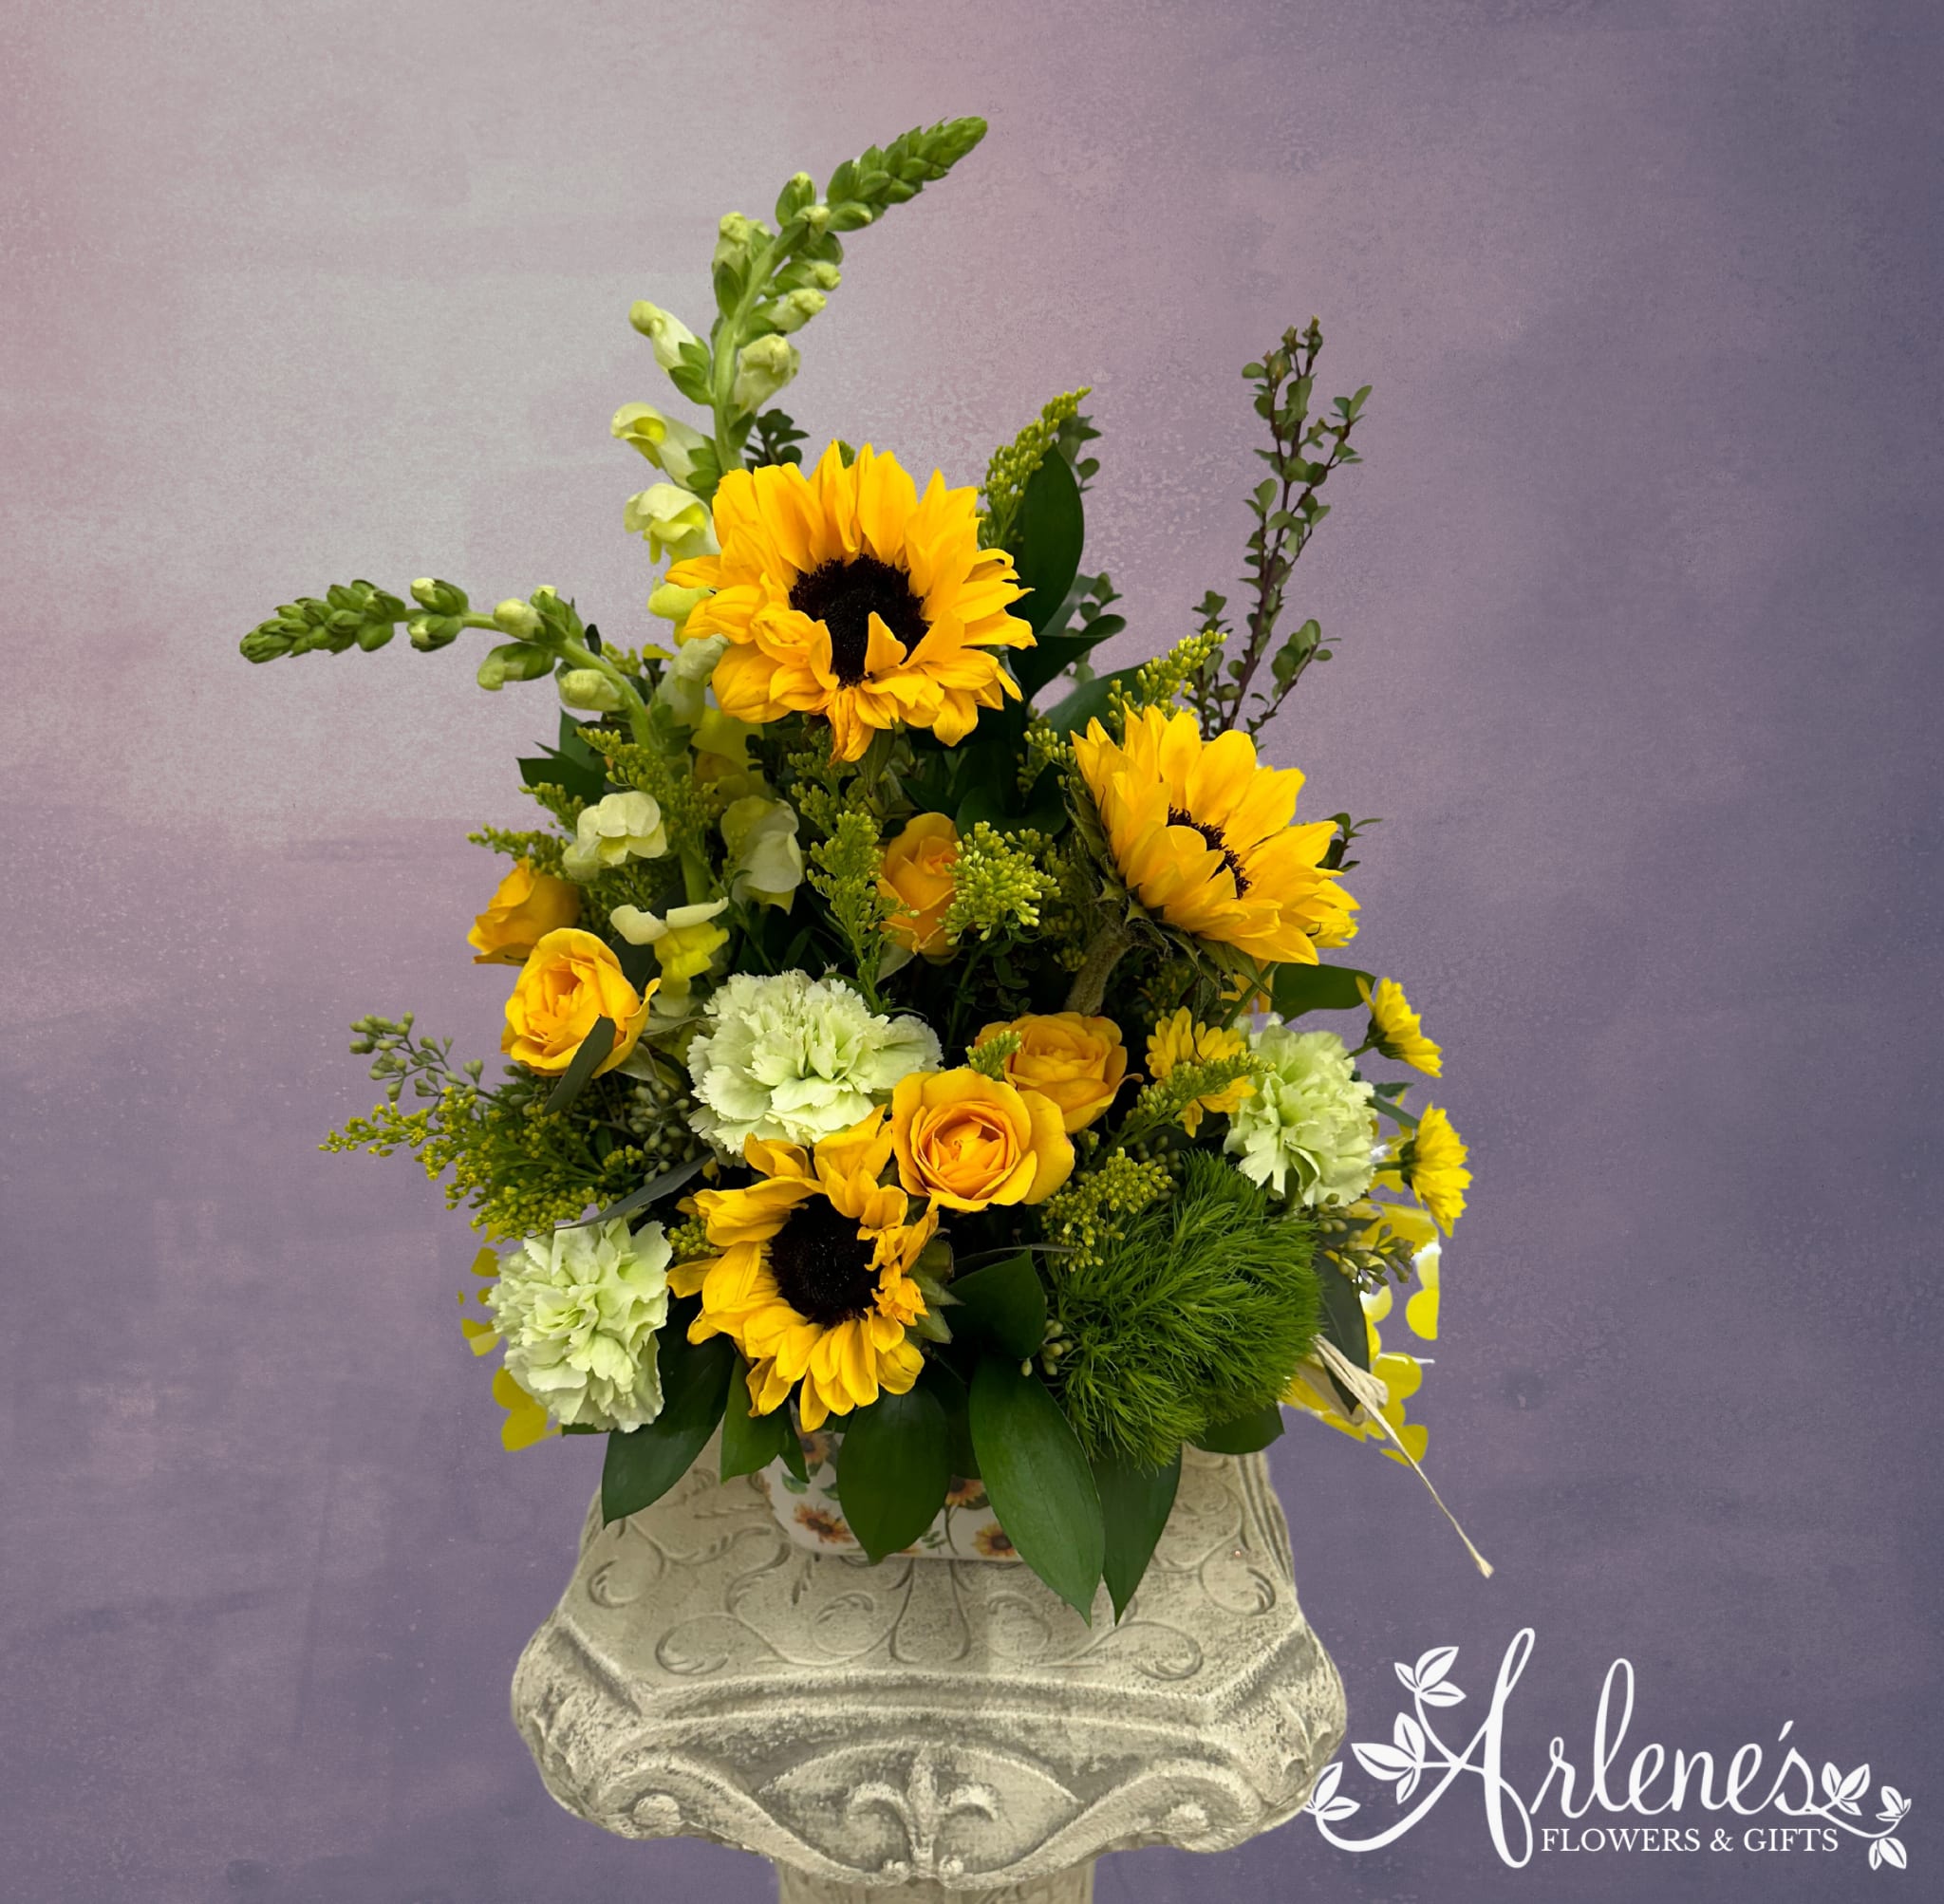 Sunny Side Up! - Sunflowers, carnations, spray roses. This yellow and green arrangement is a little Green Eggs and Ham...the container can be used to cook something up...